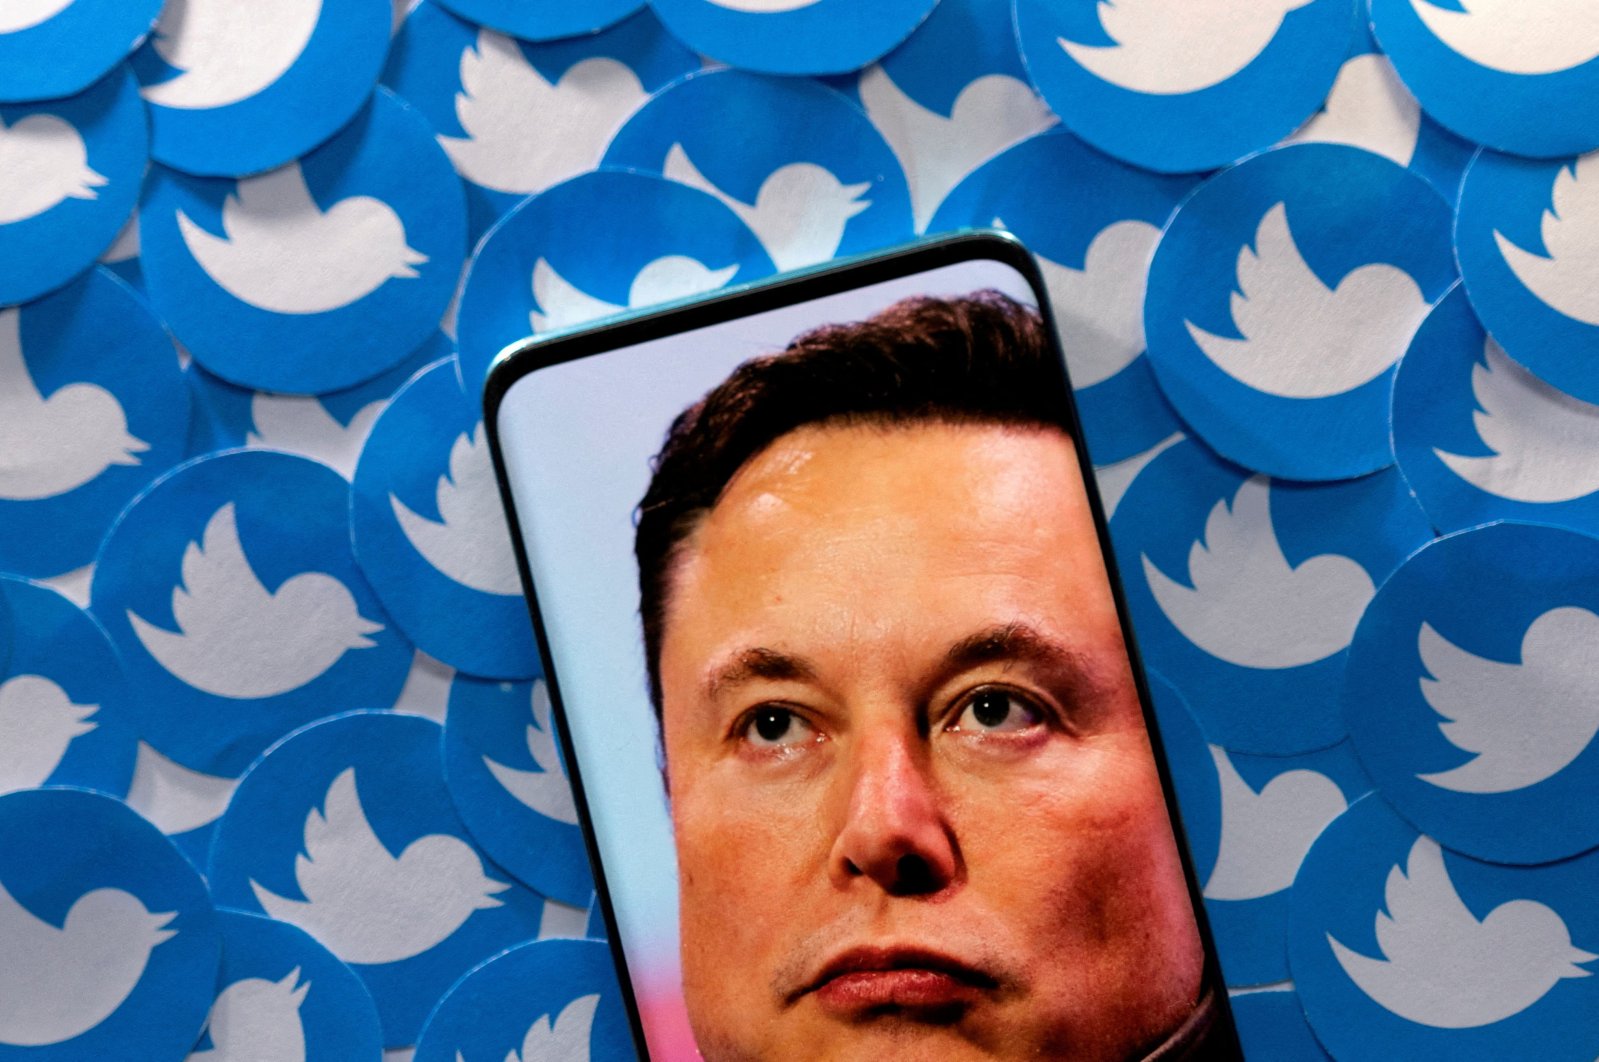 An image of Elon Musk is seen on a smartphone placed on printed Twitter logos in this photo illustration created on April 28, 2022. (Reuters Photo)